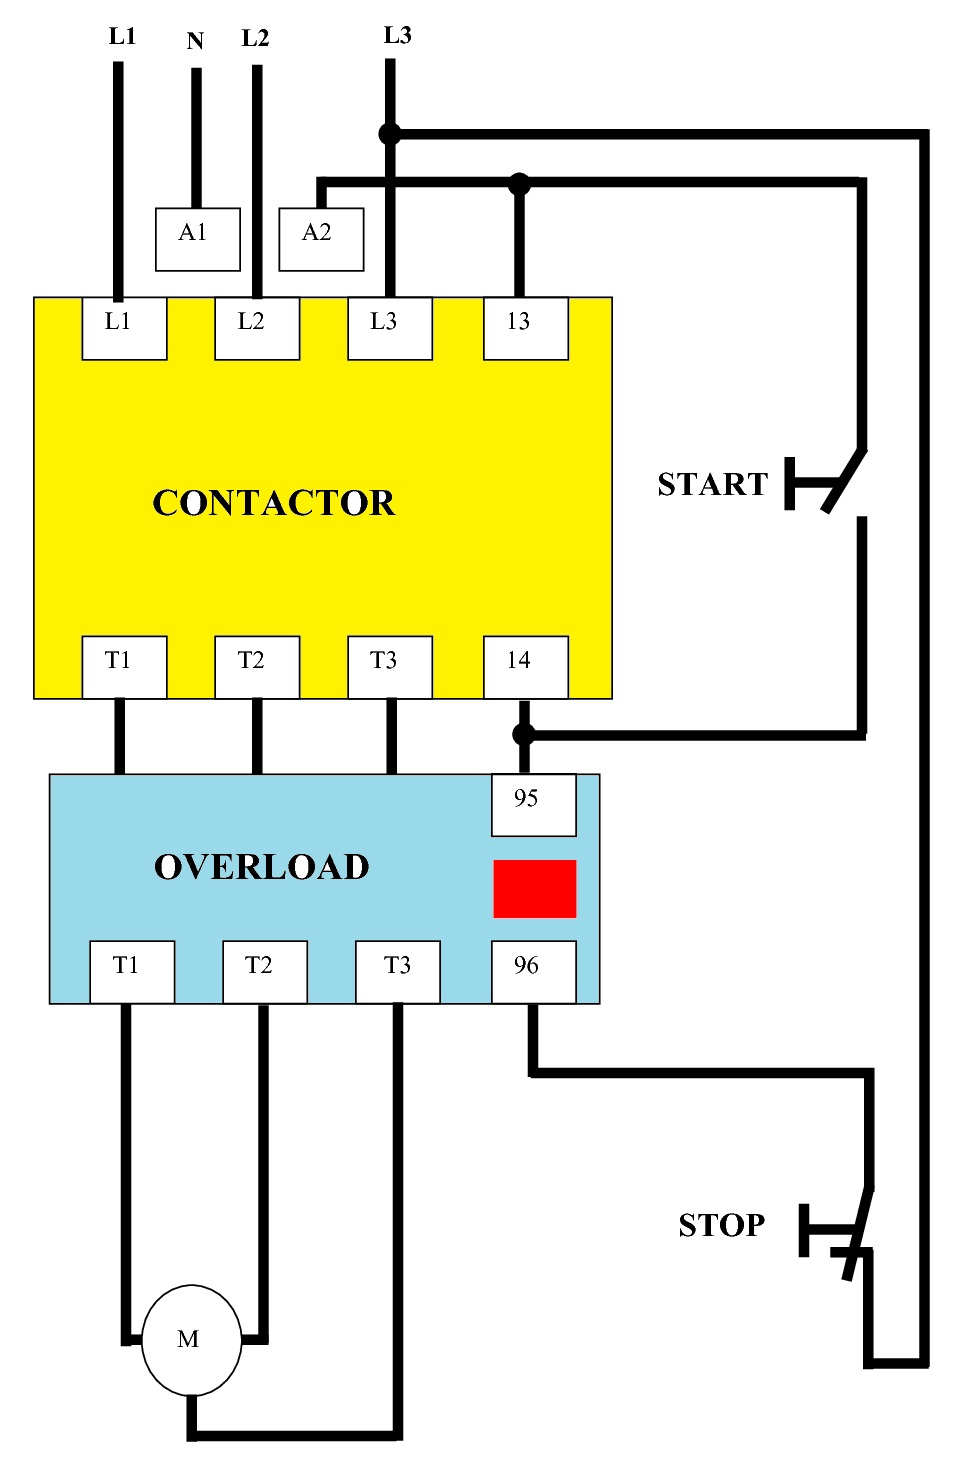 Direct On Line (DOL) Wiring Diagram for 3-Phase with 110/230VAC ...